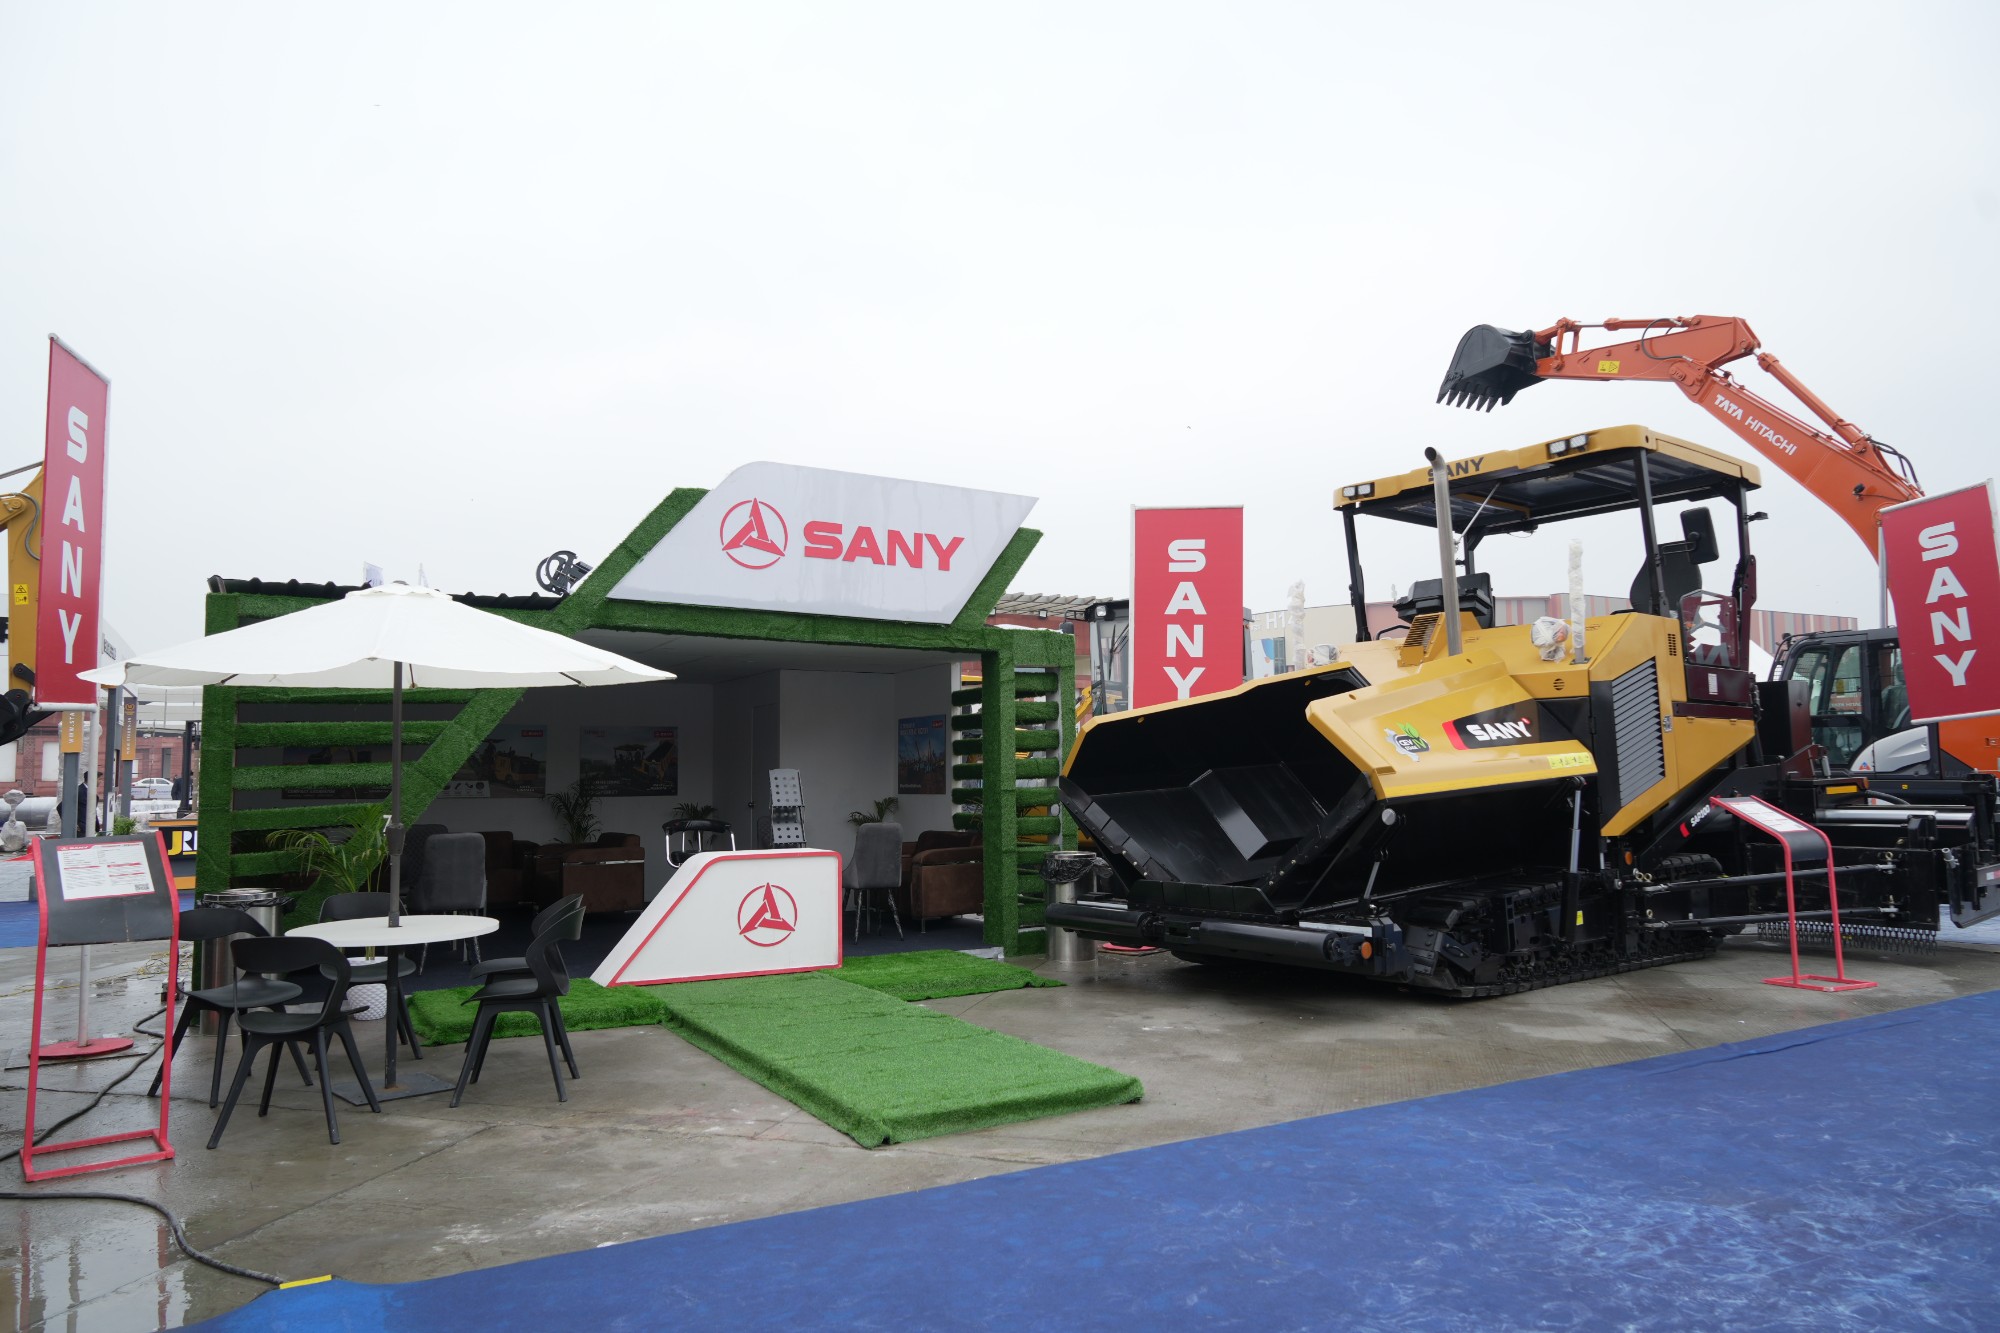 SANY showcases construction equipment at Global Expo